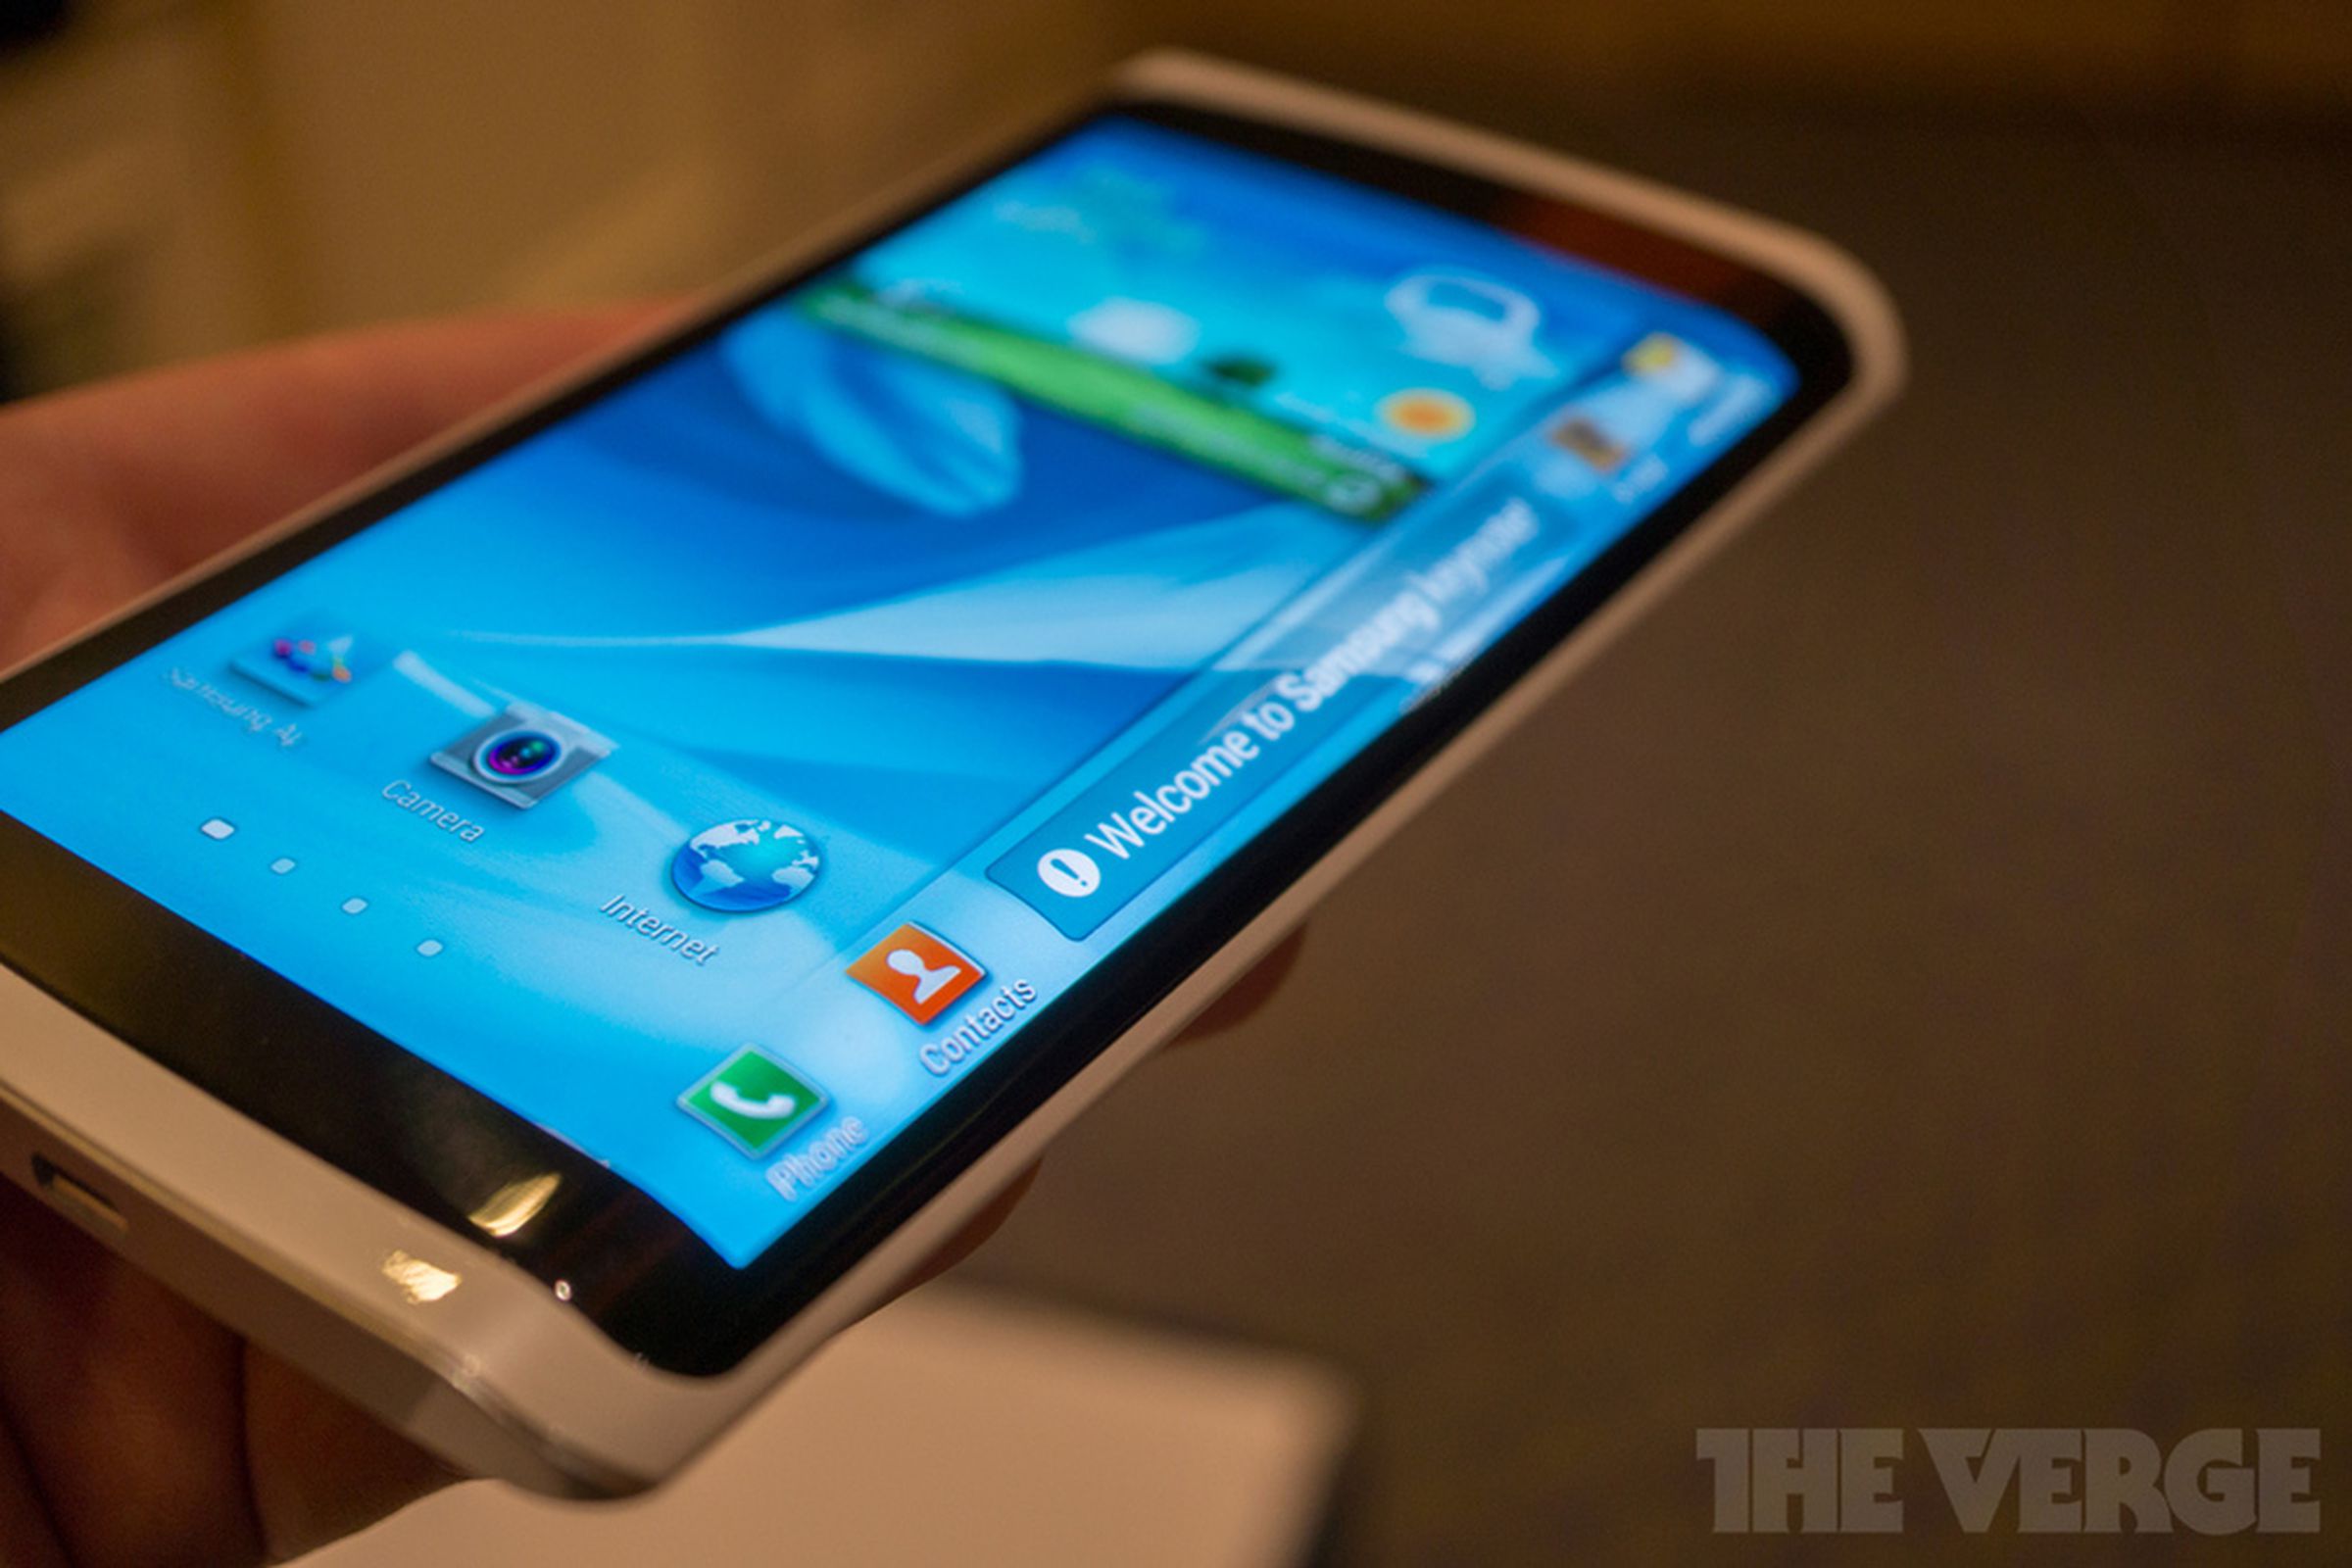 Samsung concept device demonstrated in January